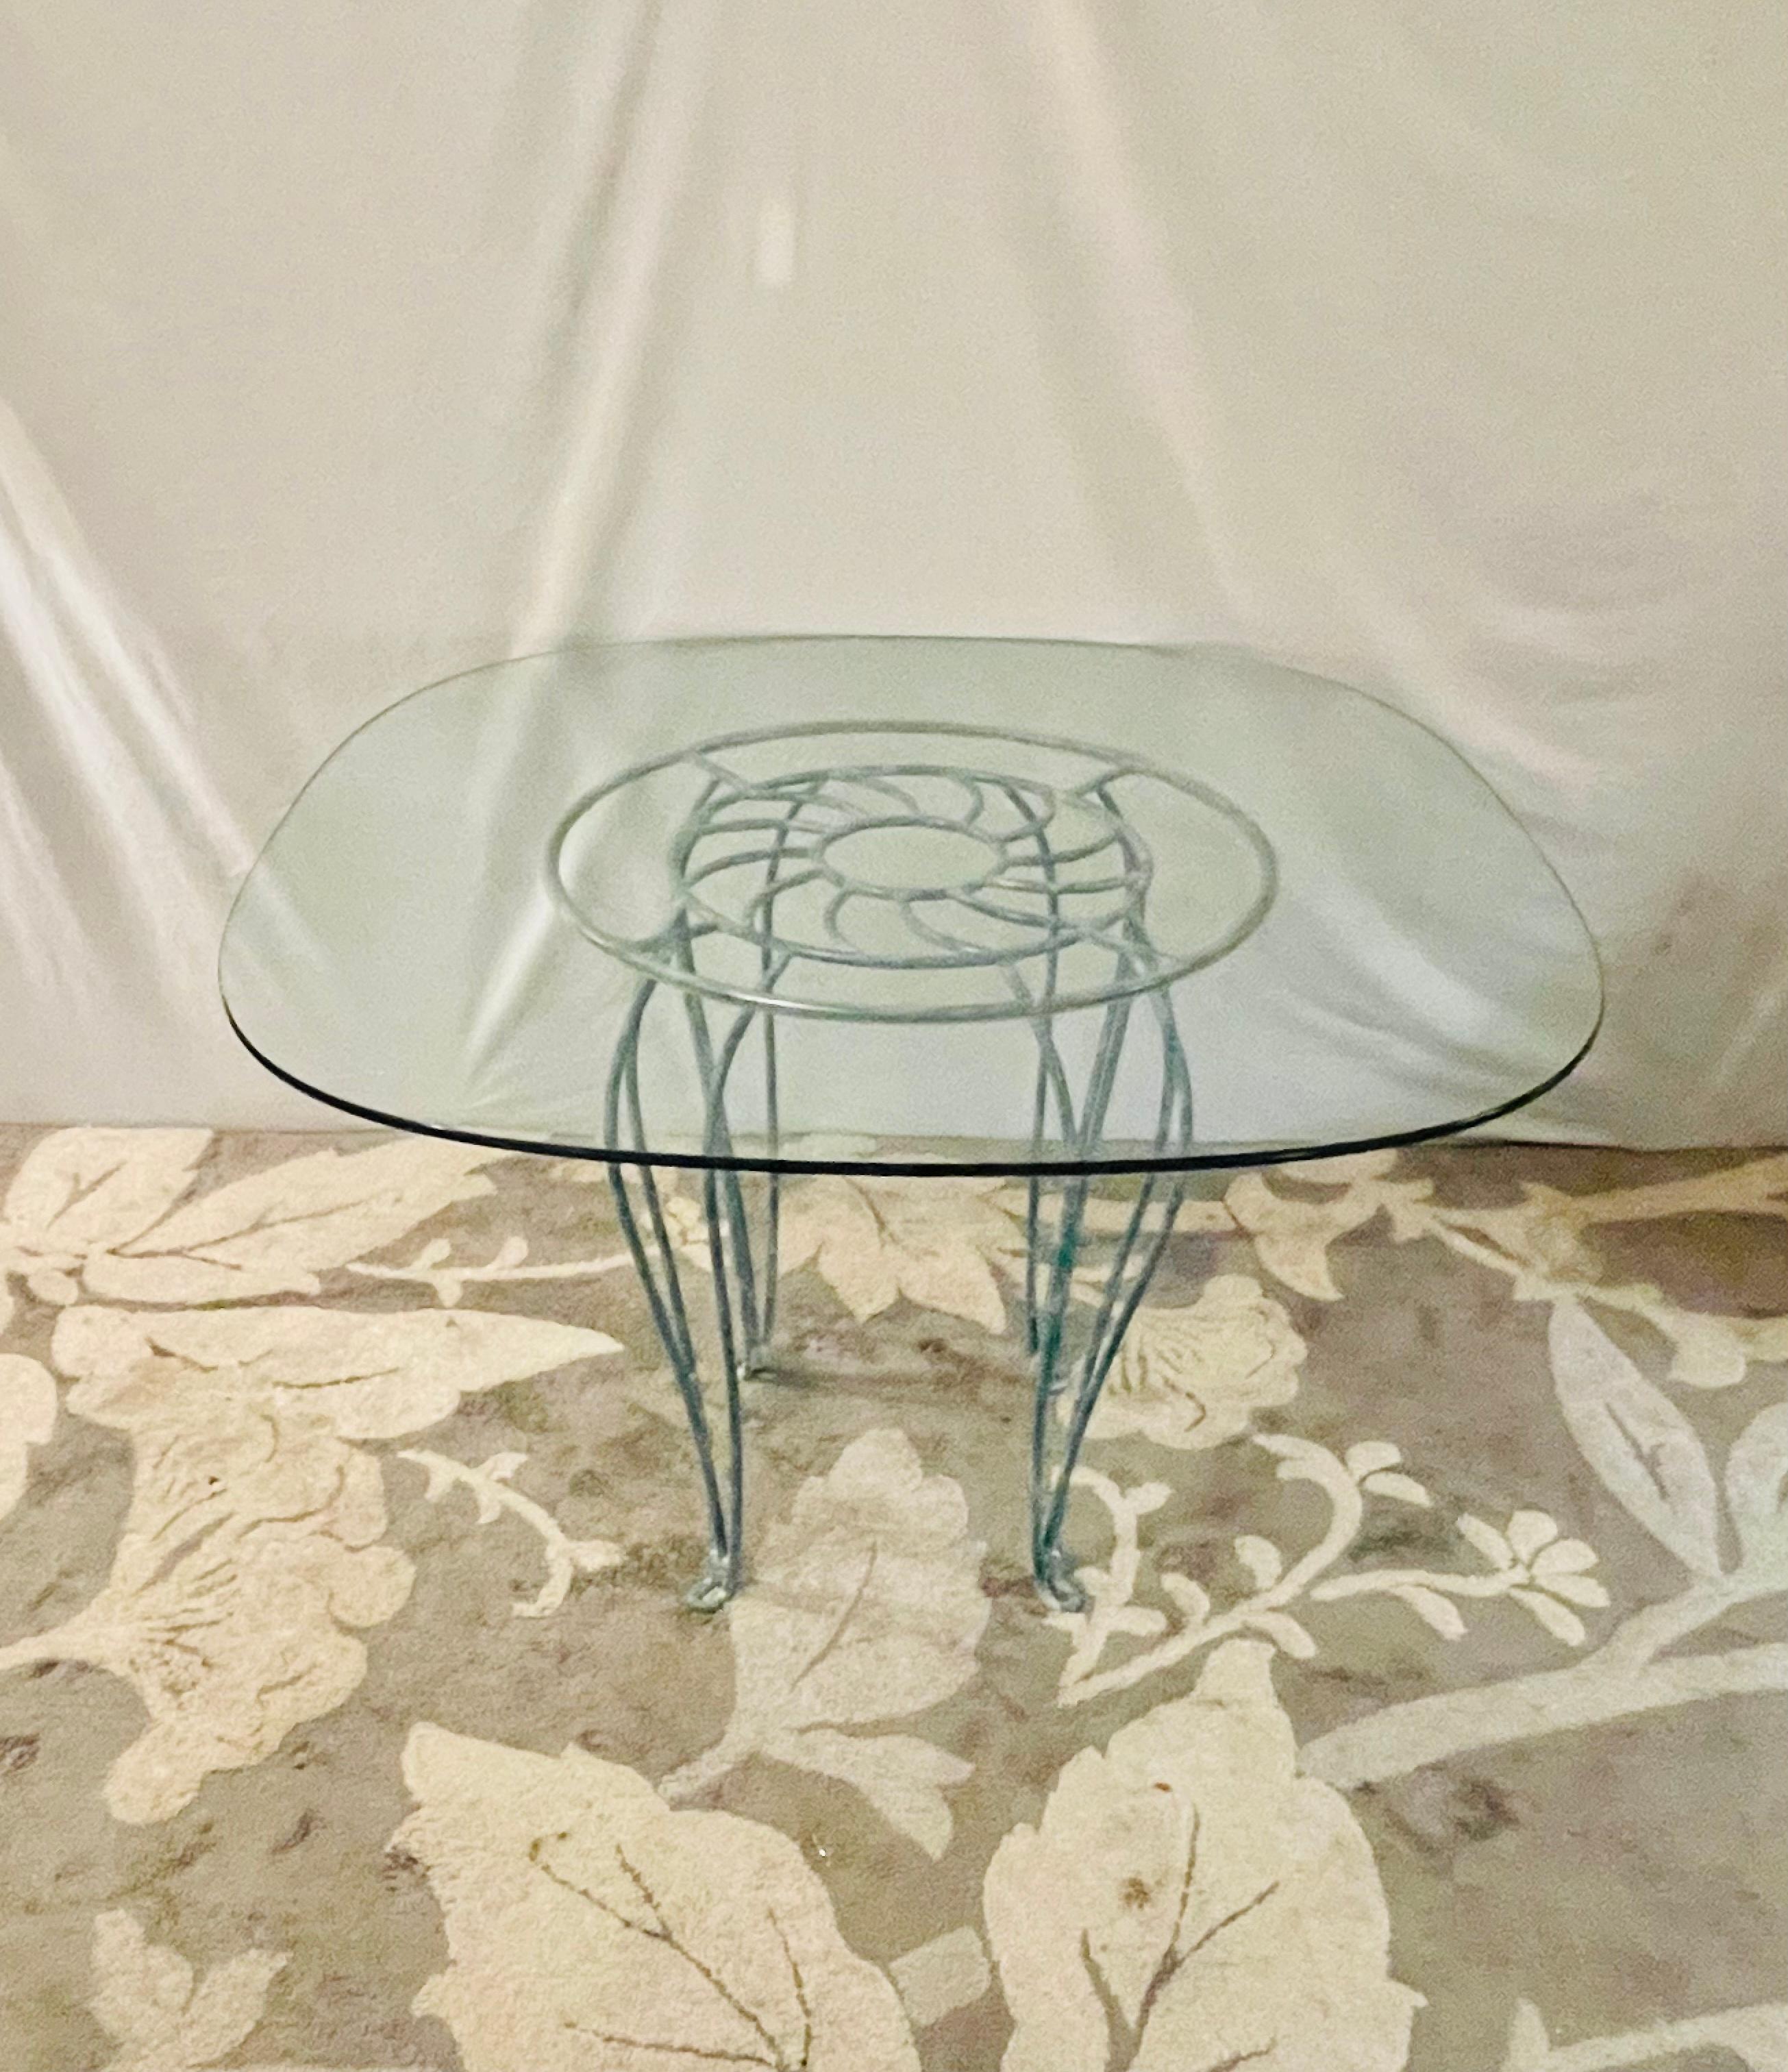 Available now and ready to ship is a Coastal Wrought Iron Seashell Table featuring a flaw free 1/2 inch glass top. Beautiful Green Wrought Iron with Seashell in the middle and curved legs. Glass sits on top with protective covering. 

4 Seashell